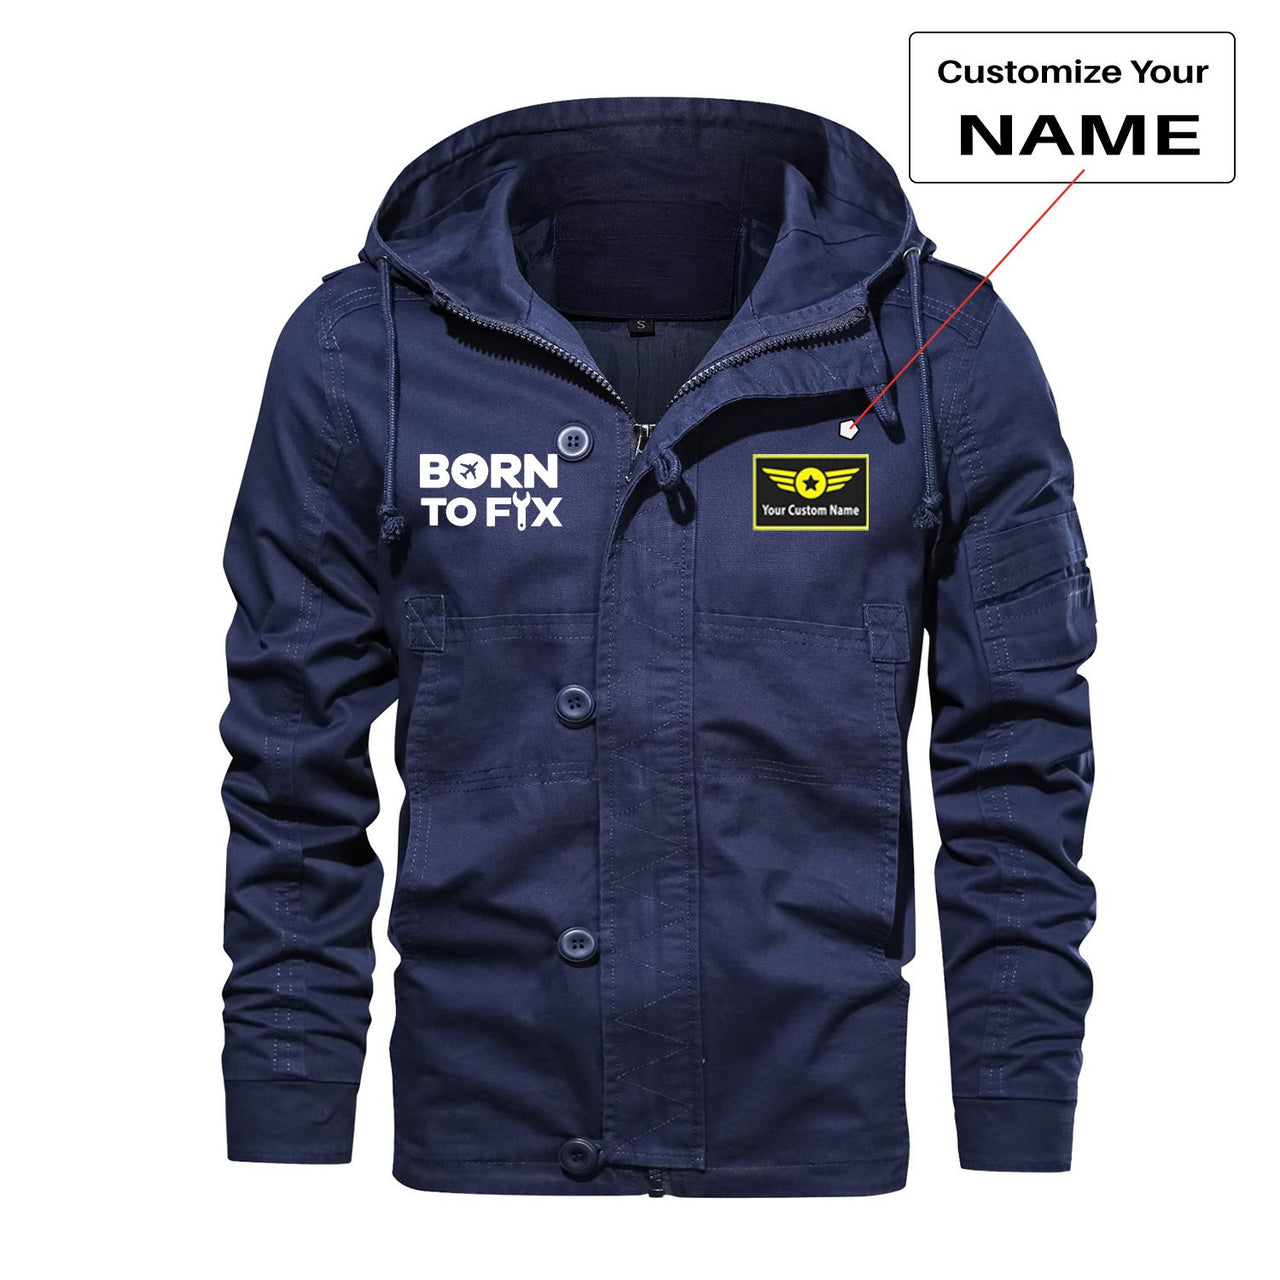 Born To Fix Airplanes Designed Cotton Jackets